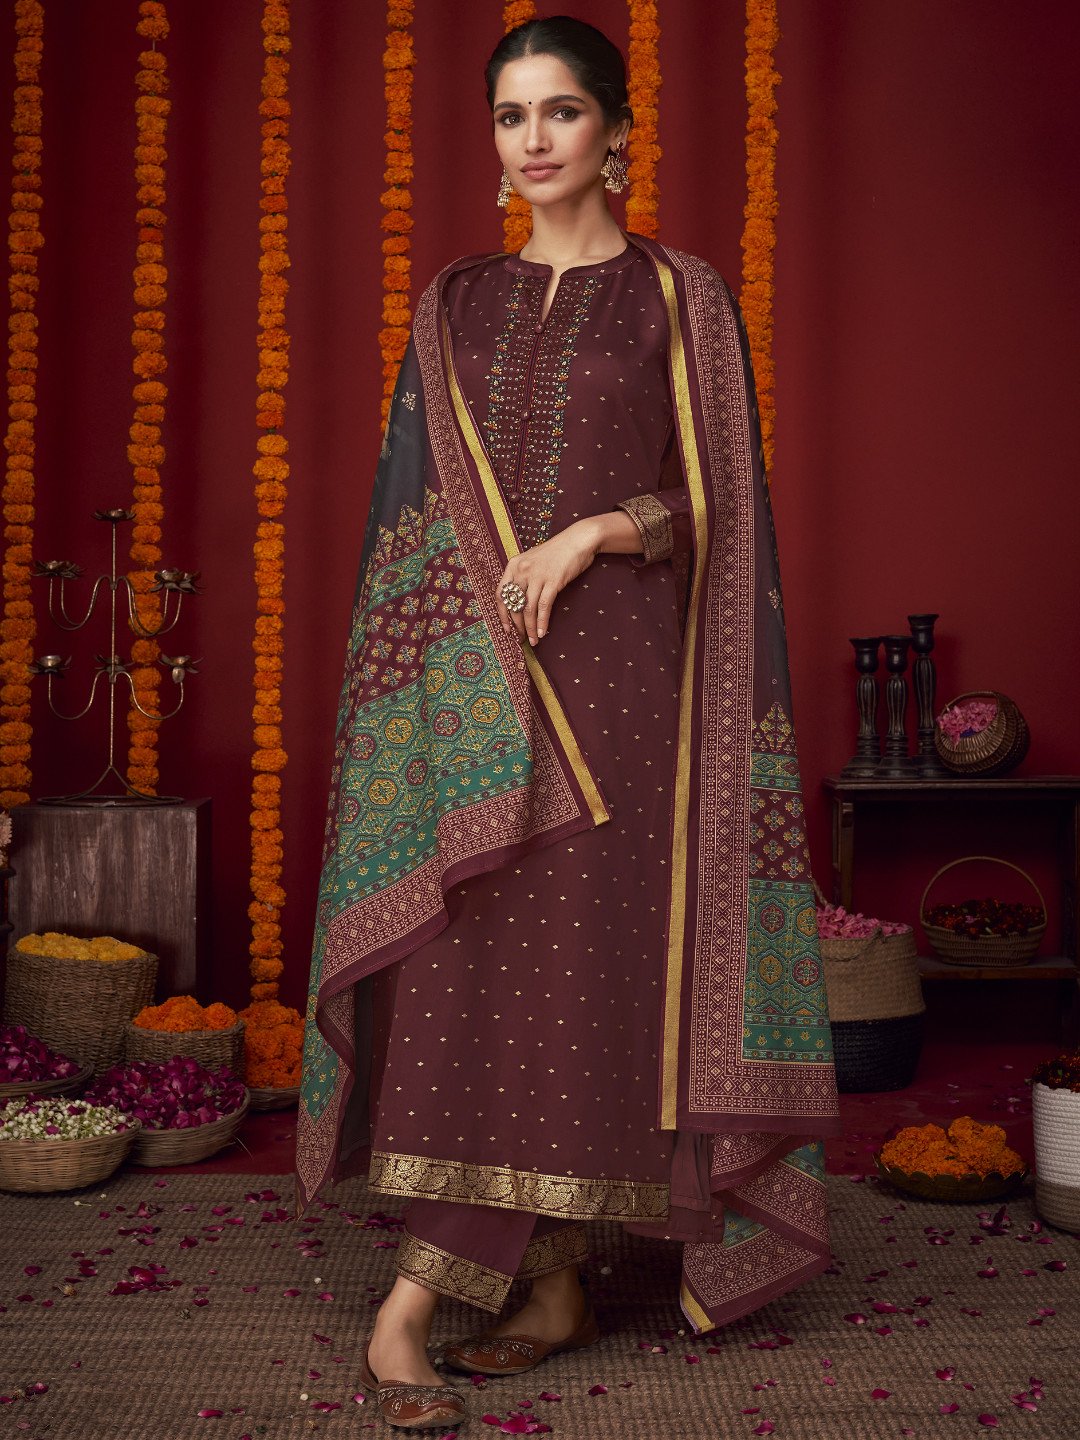 Unstitched Embroidered Cotton Satin Rust Red Suit Material with Dupatta Mumtaz Arts